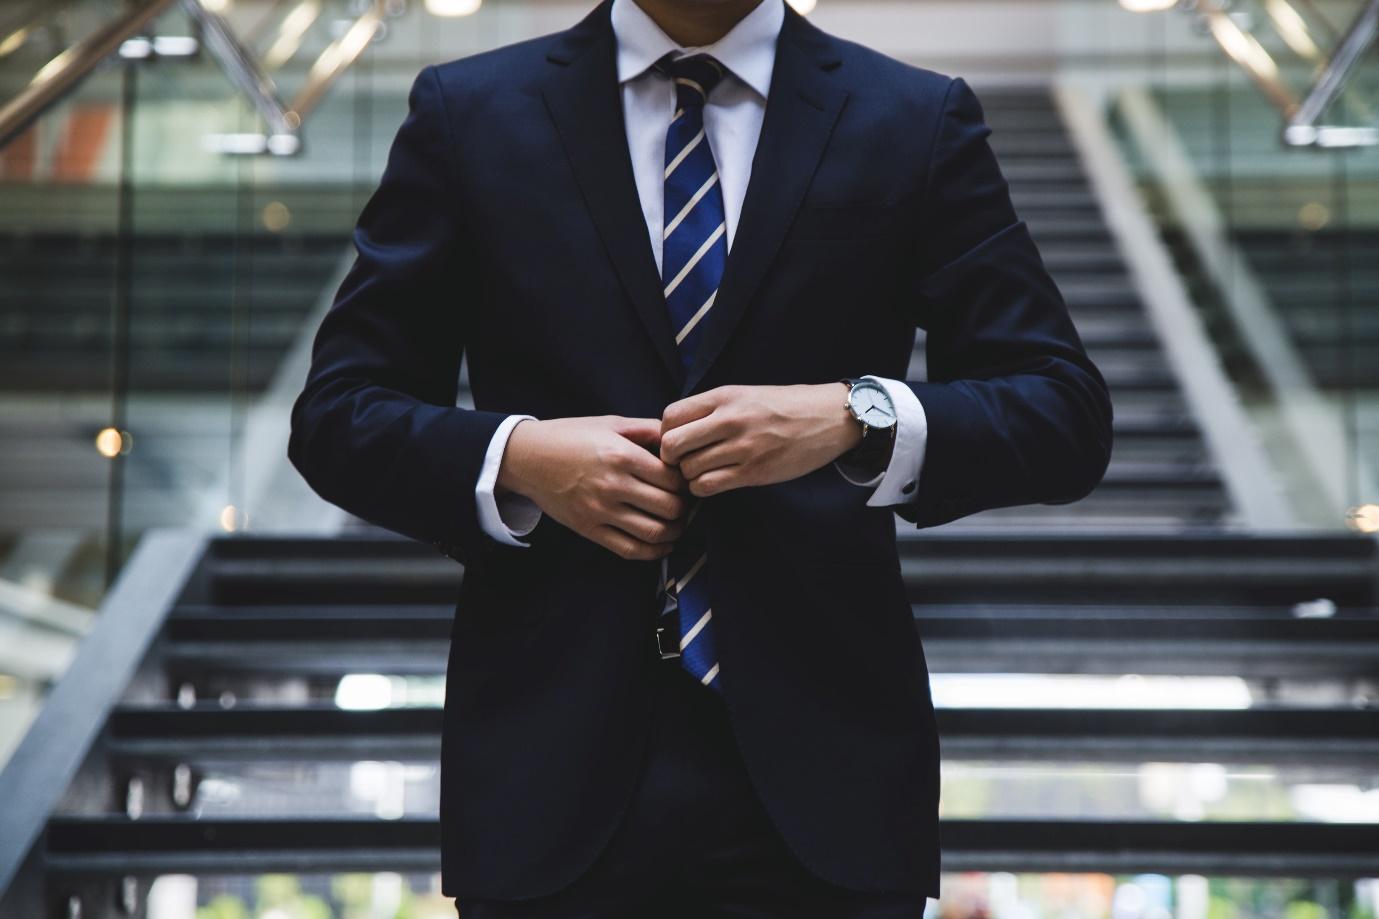 A person in a suit and tie

Description automatically generated with medium confidence